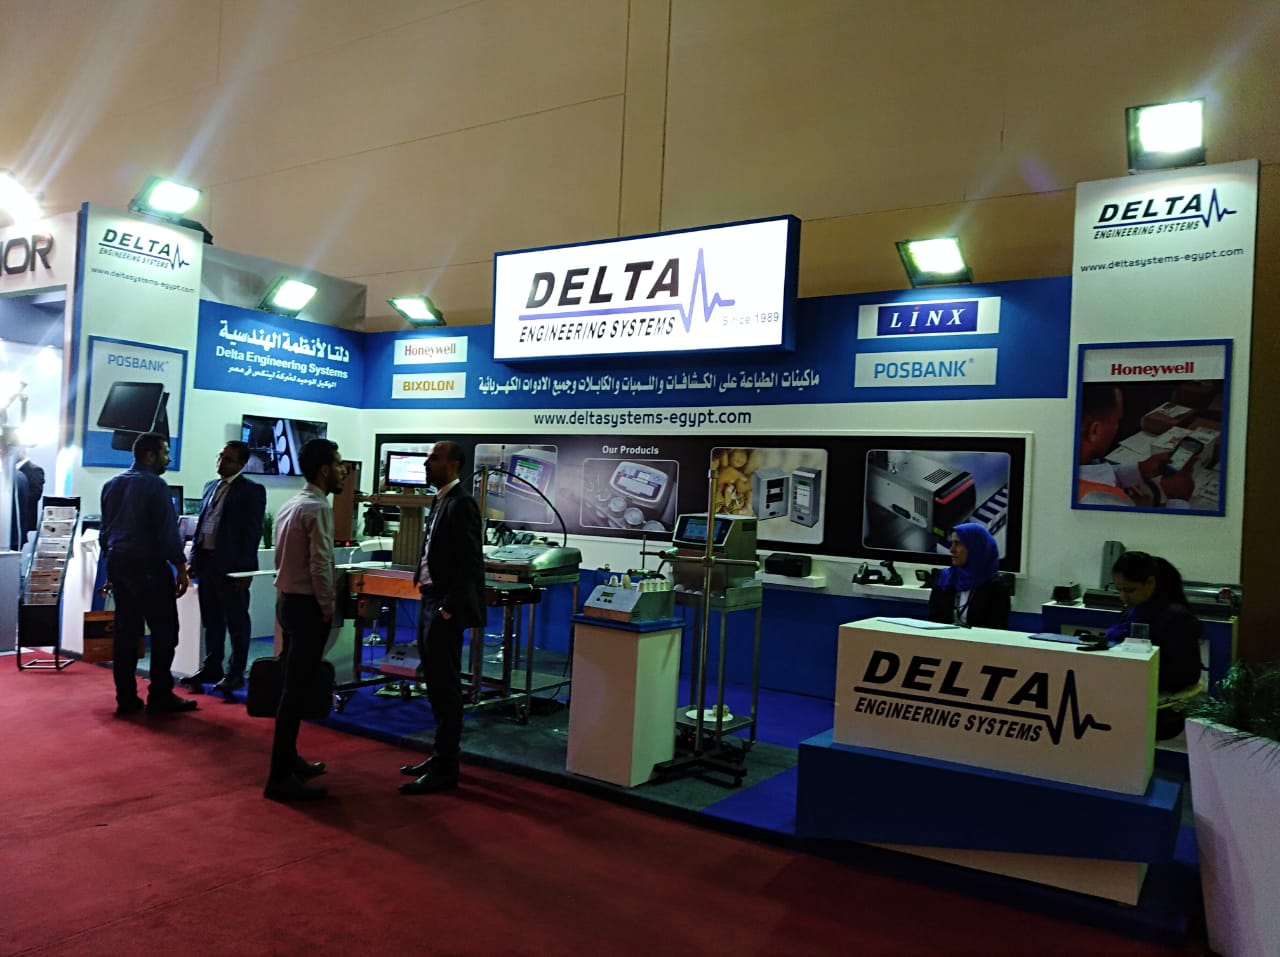 LED MIDDLE EAST 2019 EXPO